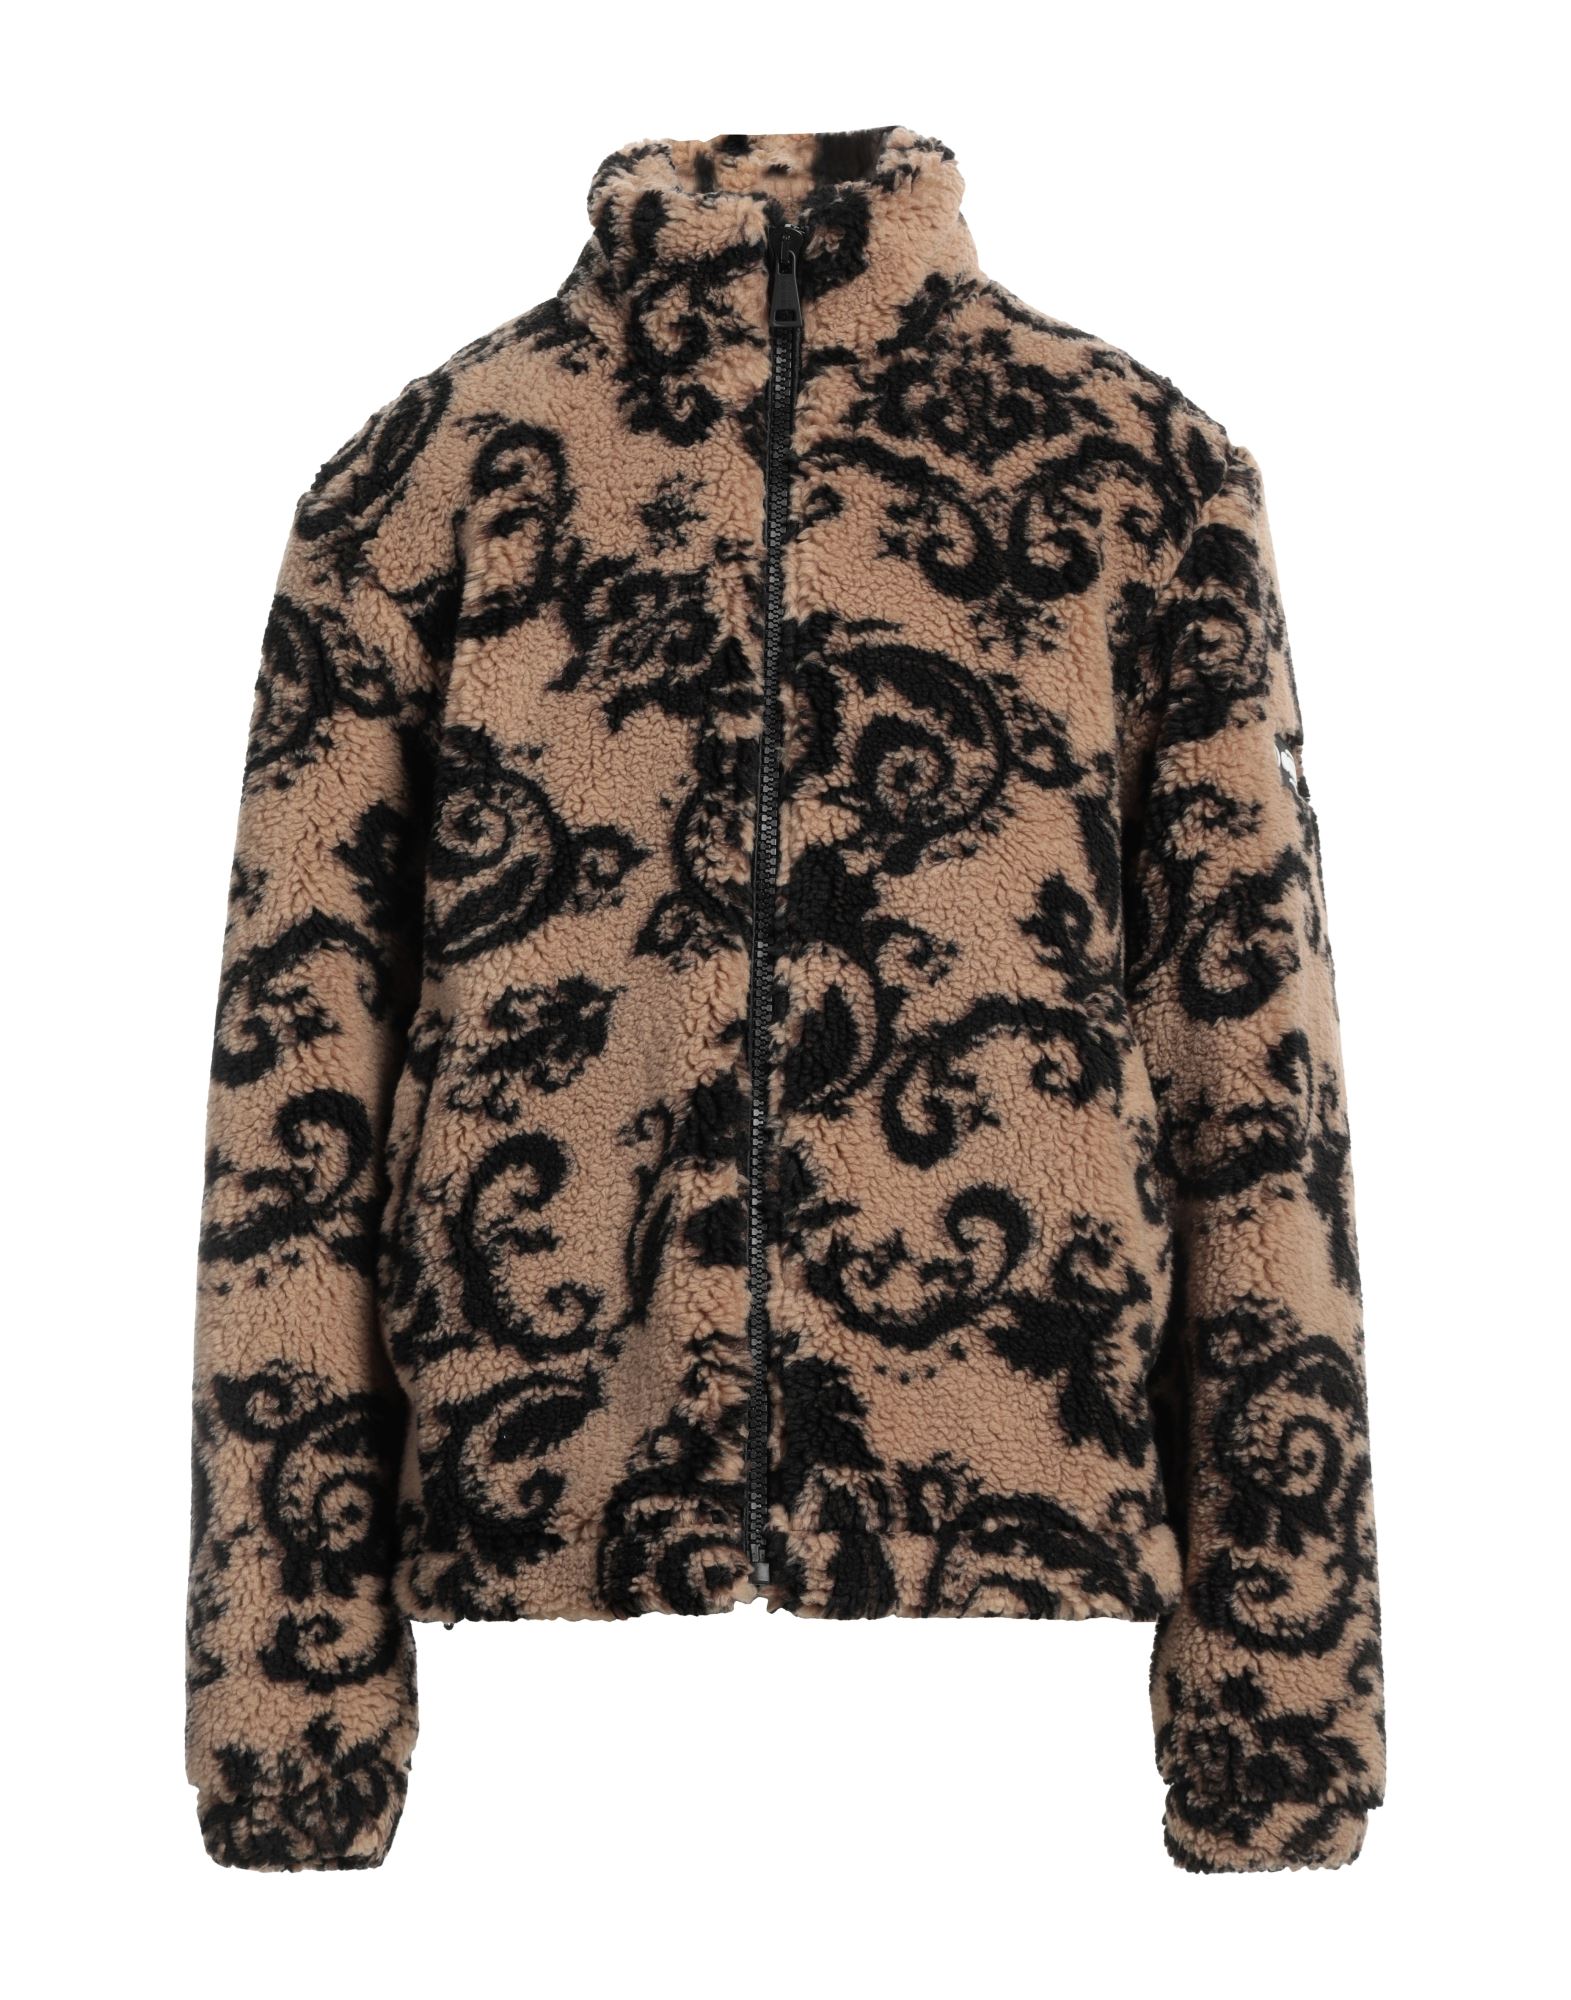 VERSACE JEANS COUTURE Shearling- & Kunstfell Herren Kamel von VERSACE JEANS COUTURE